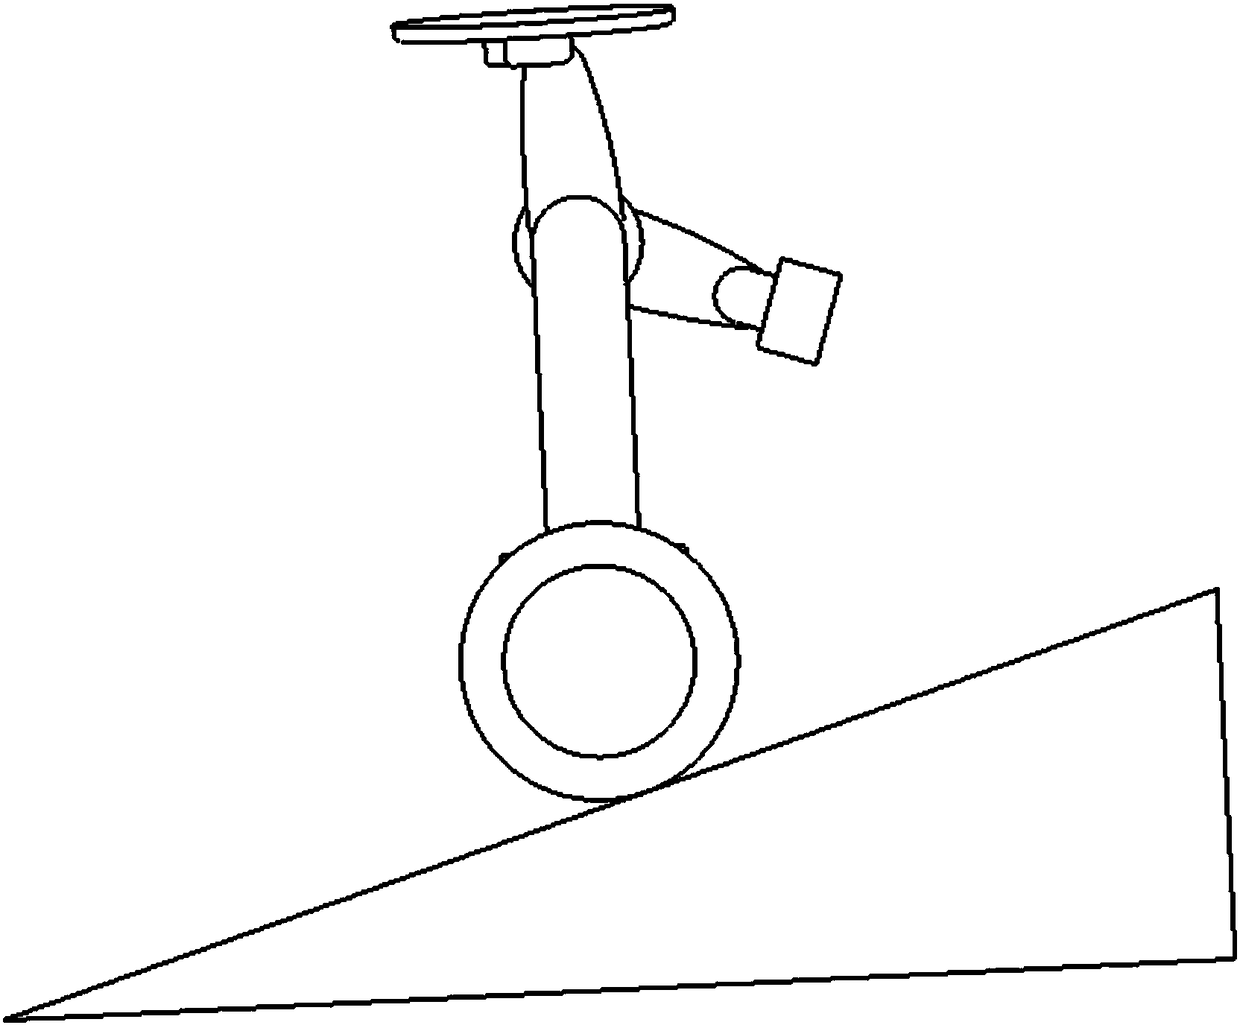 A two-wheeled self-balancing service robot with automatic swing arm